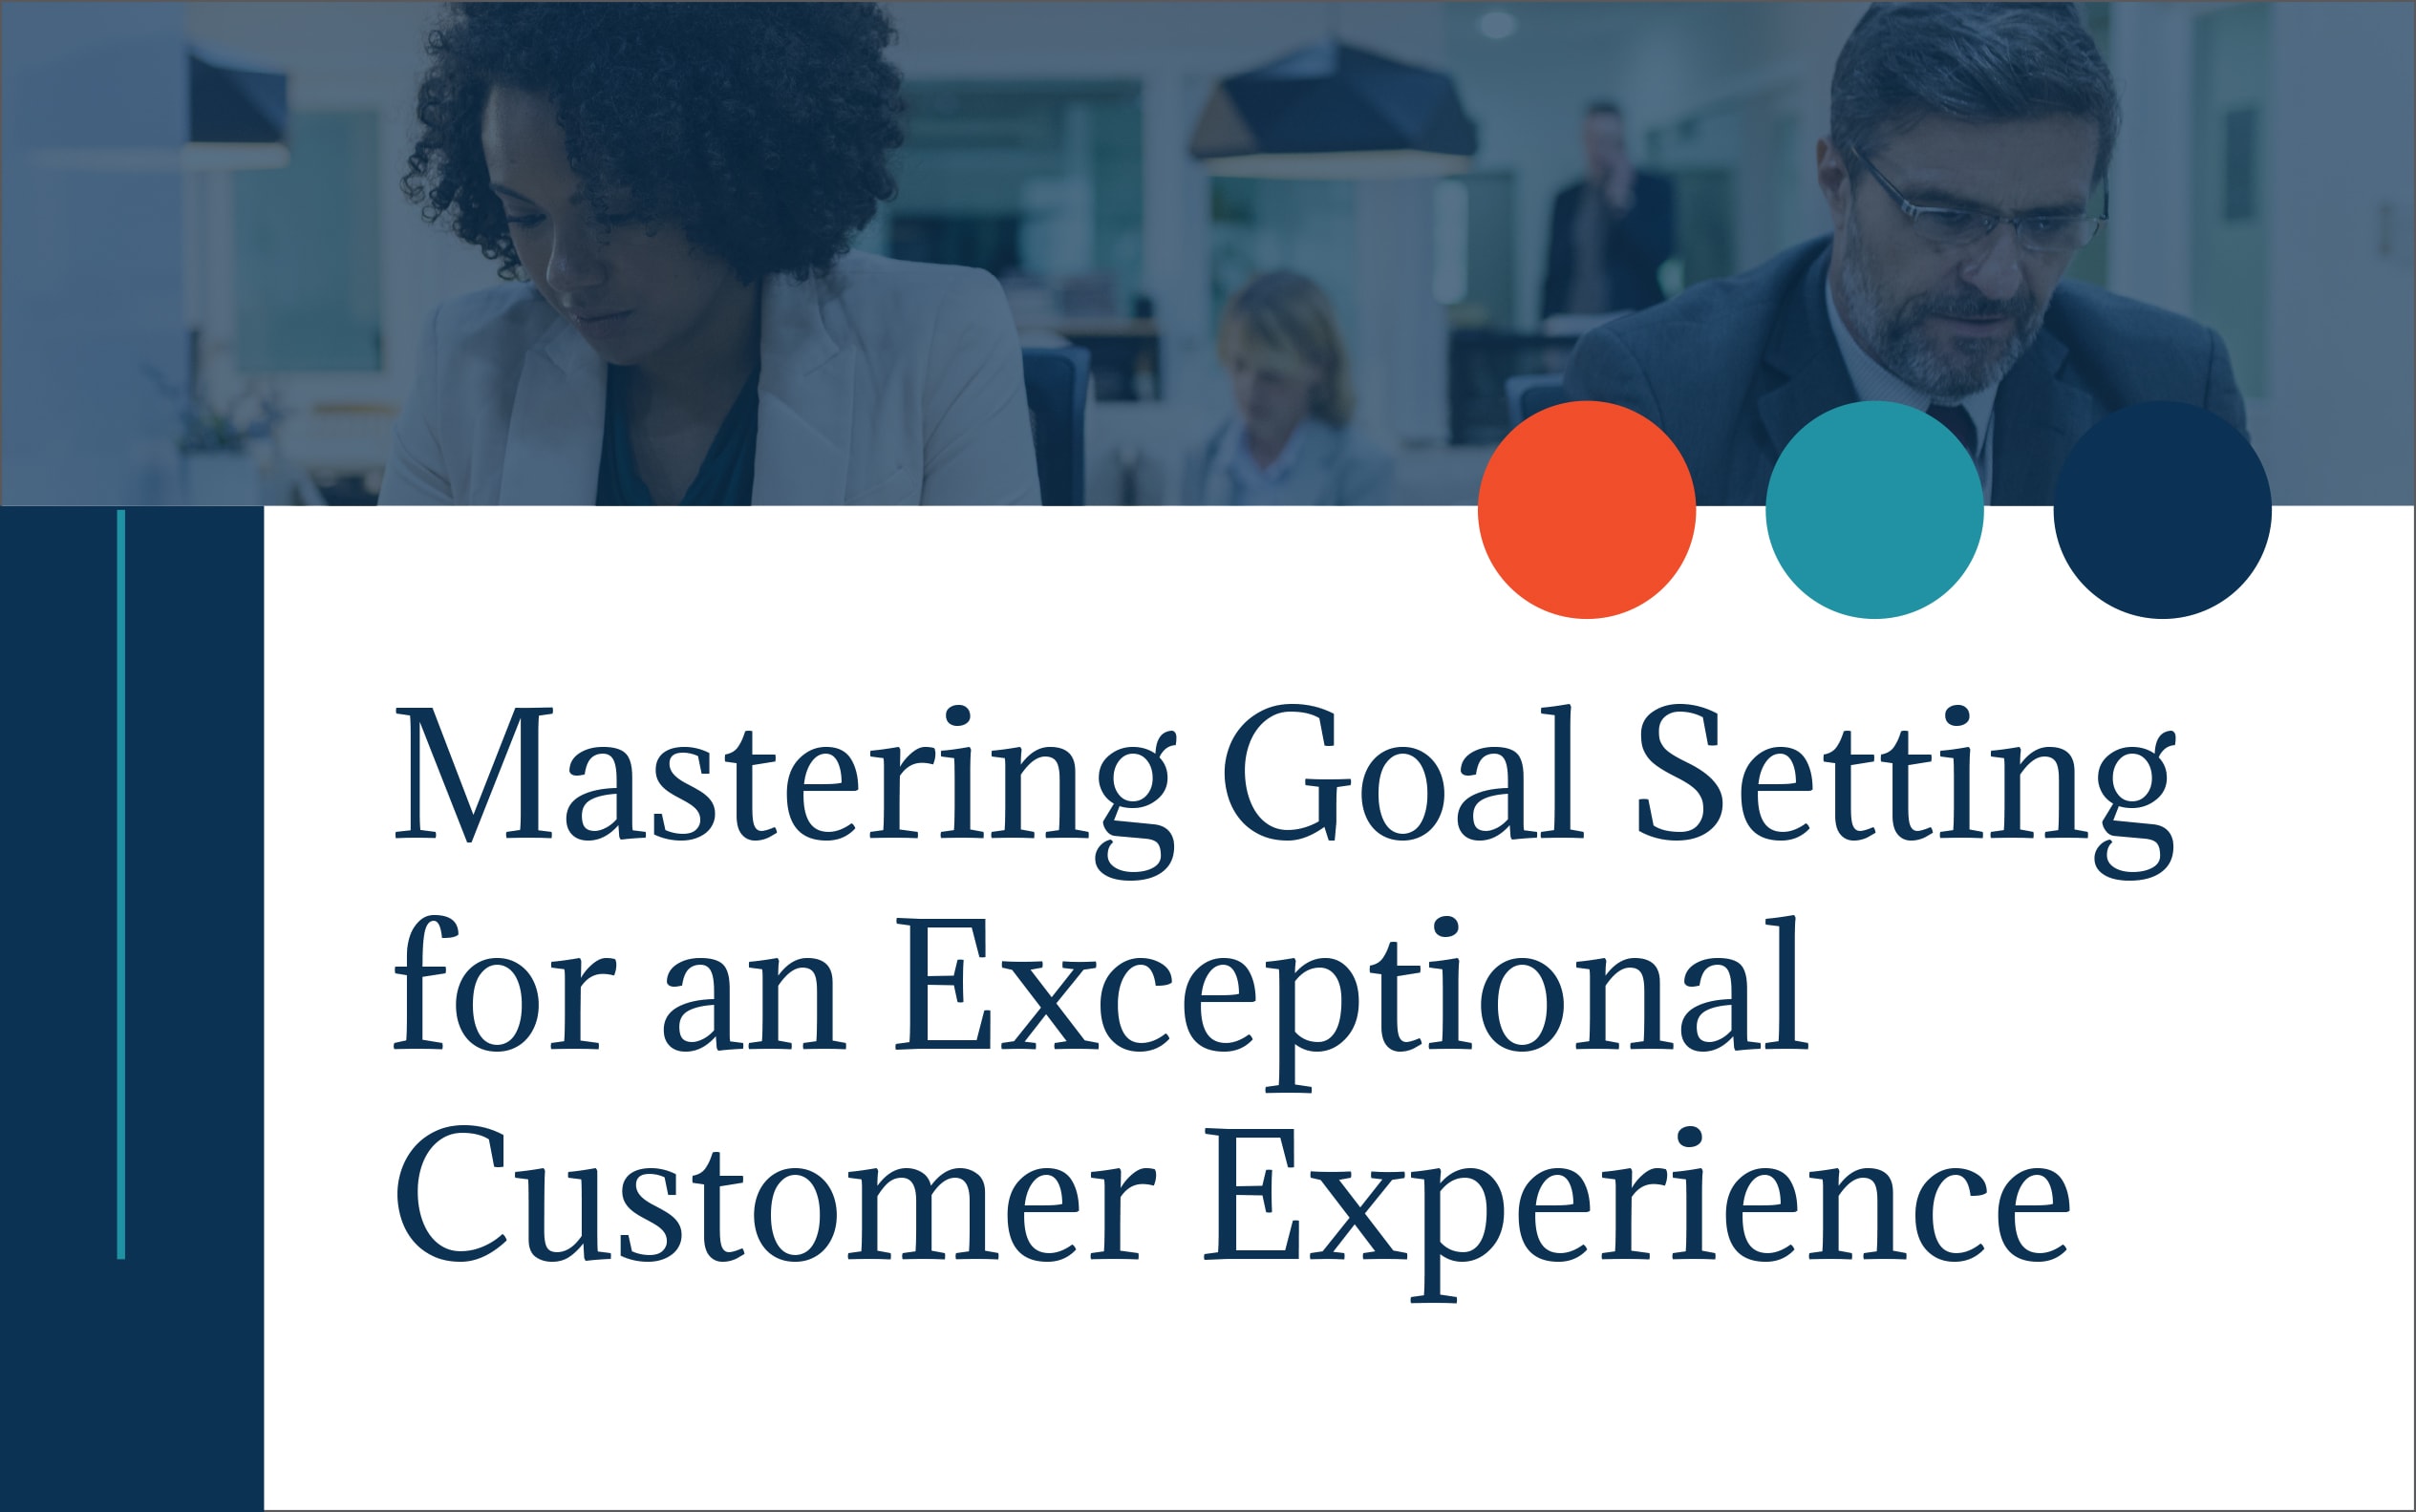 What's Your Company's CX Maturity Stage?